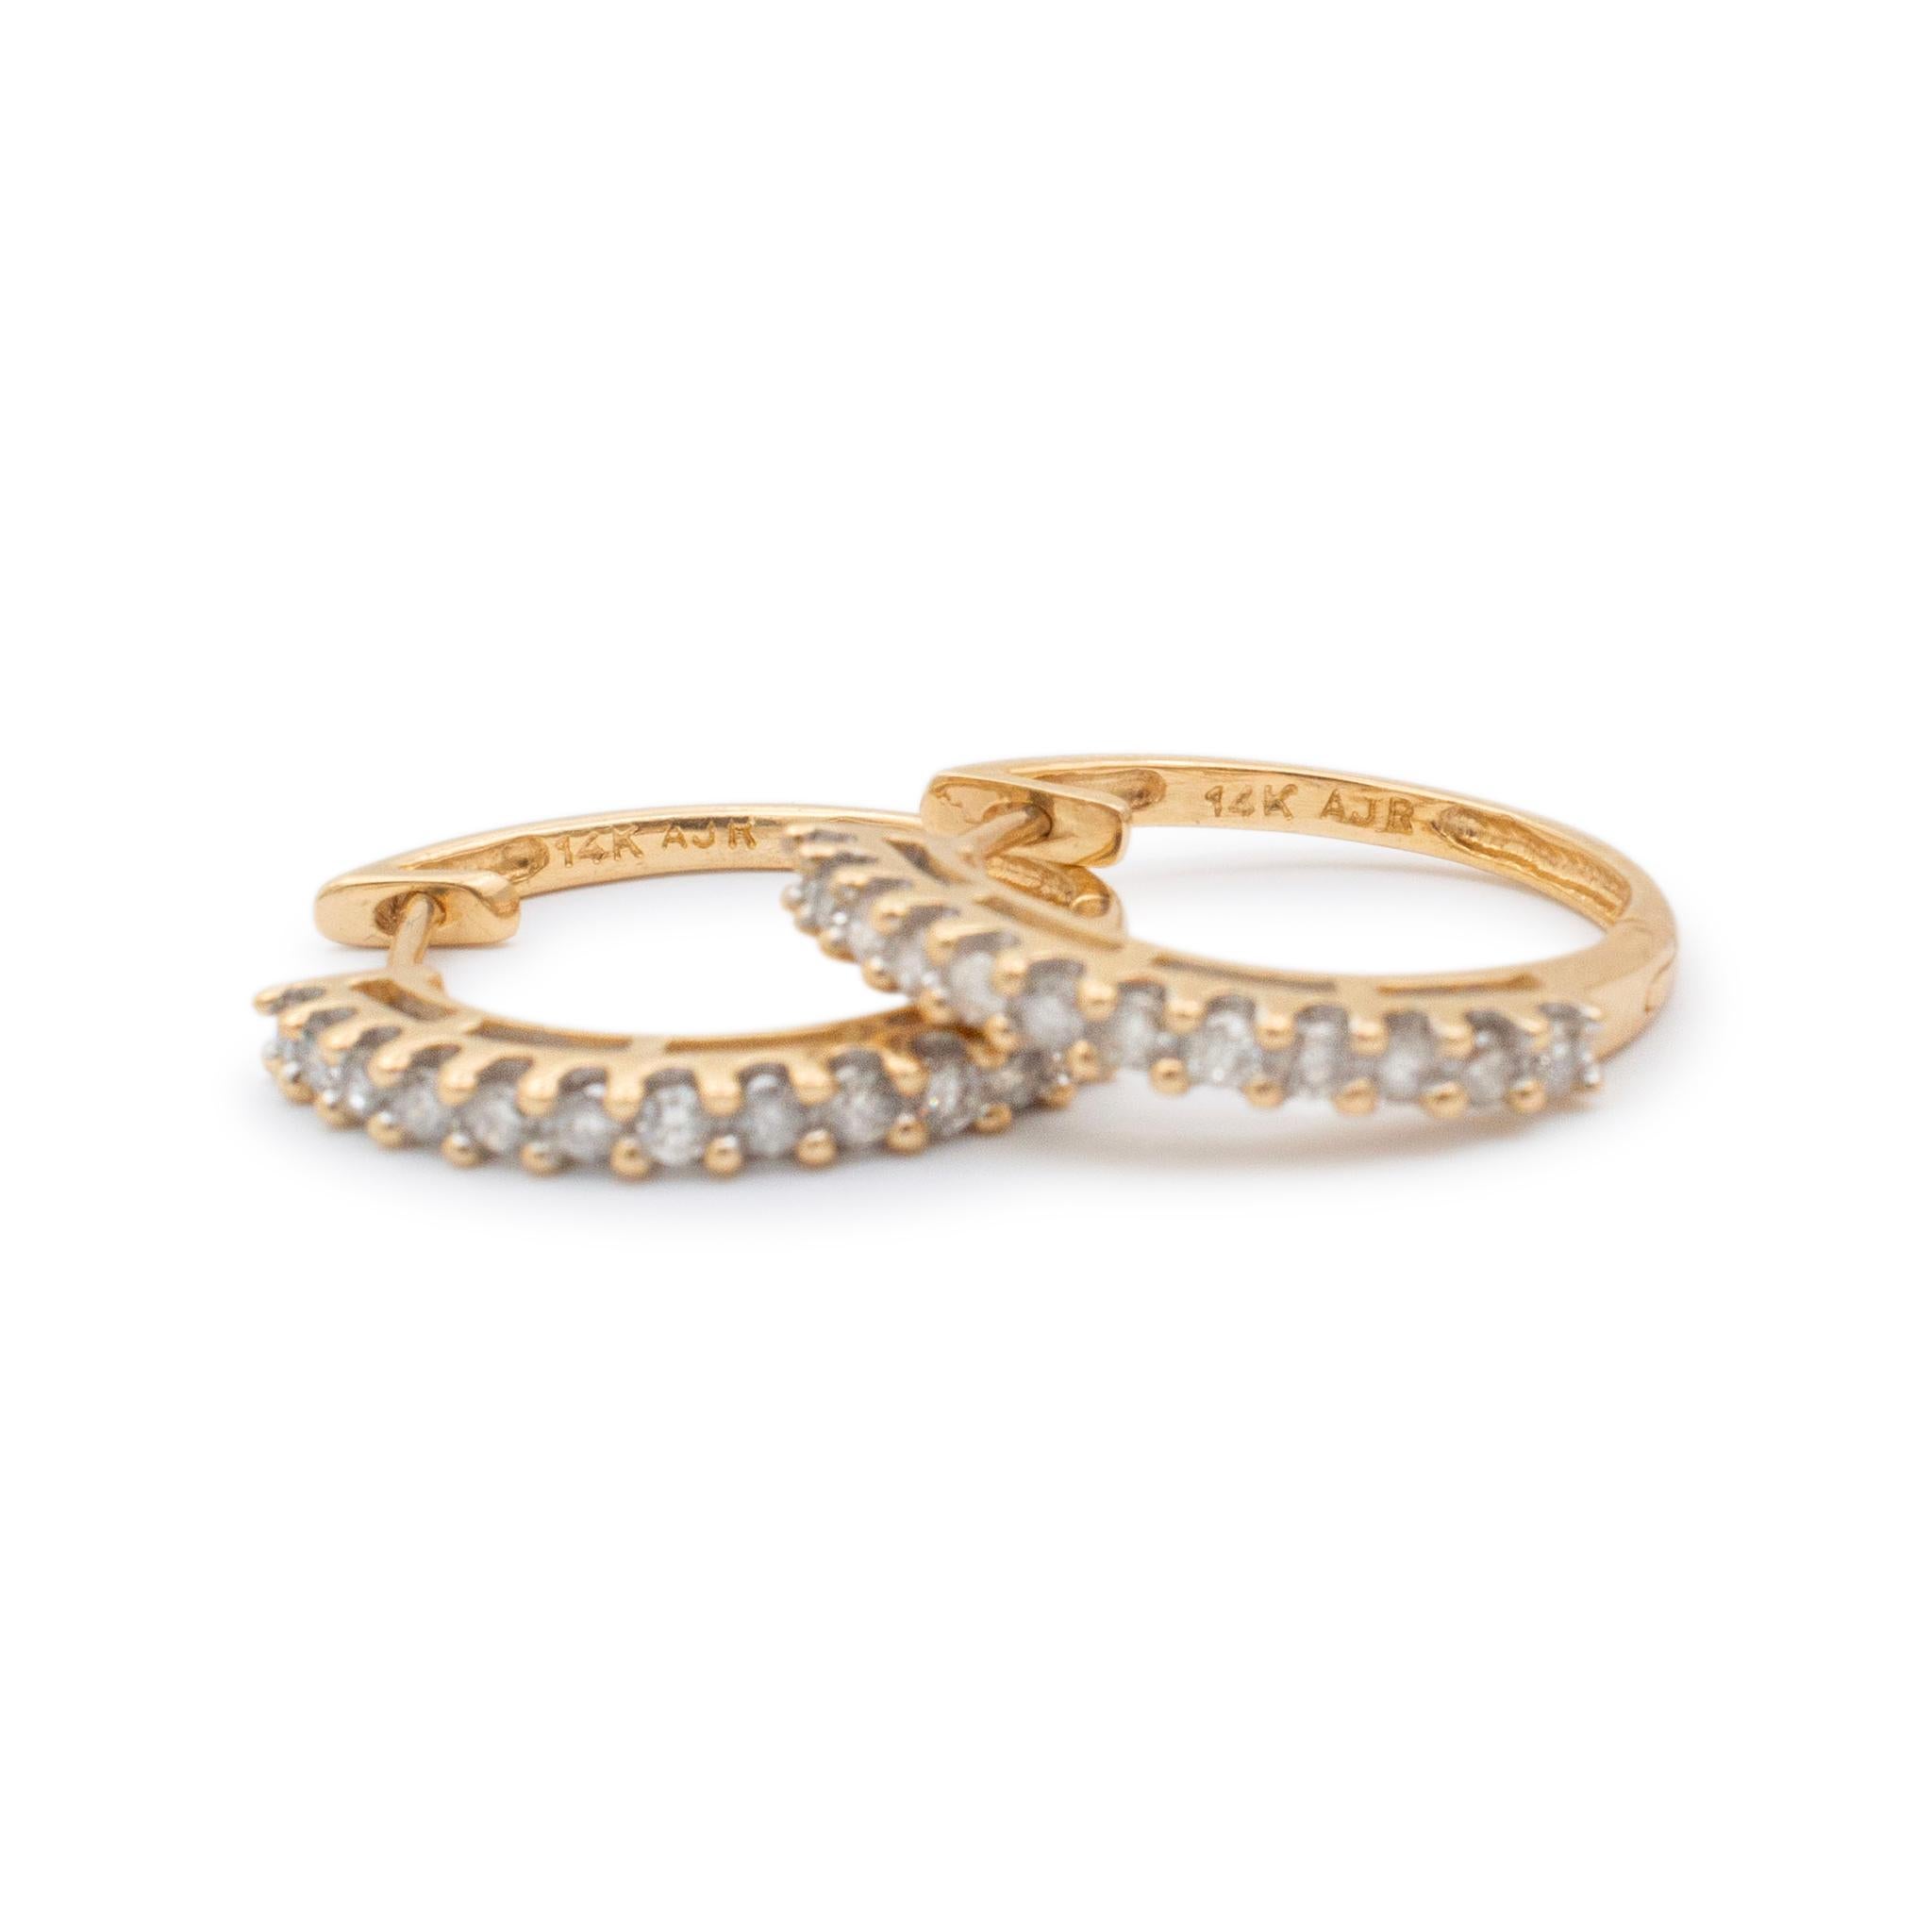 Gender: Ladies

Metal Type: 14K Yellow Gold

Length: 0.75 Inches

Width: 20.90 mm

Weight: 3.63 grams

Ladies 14K yellow gold diamond hoop earrings with locking backs. Engraved with 